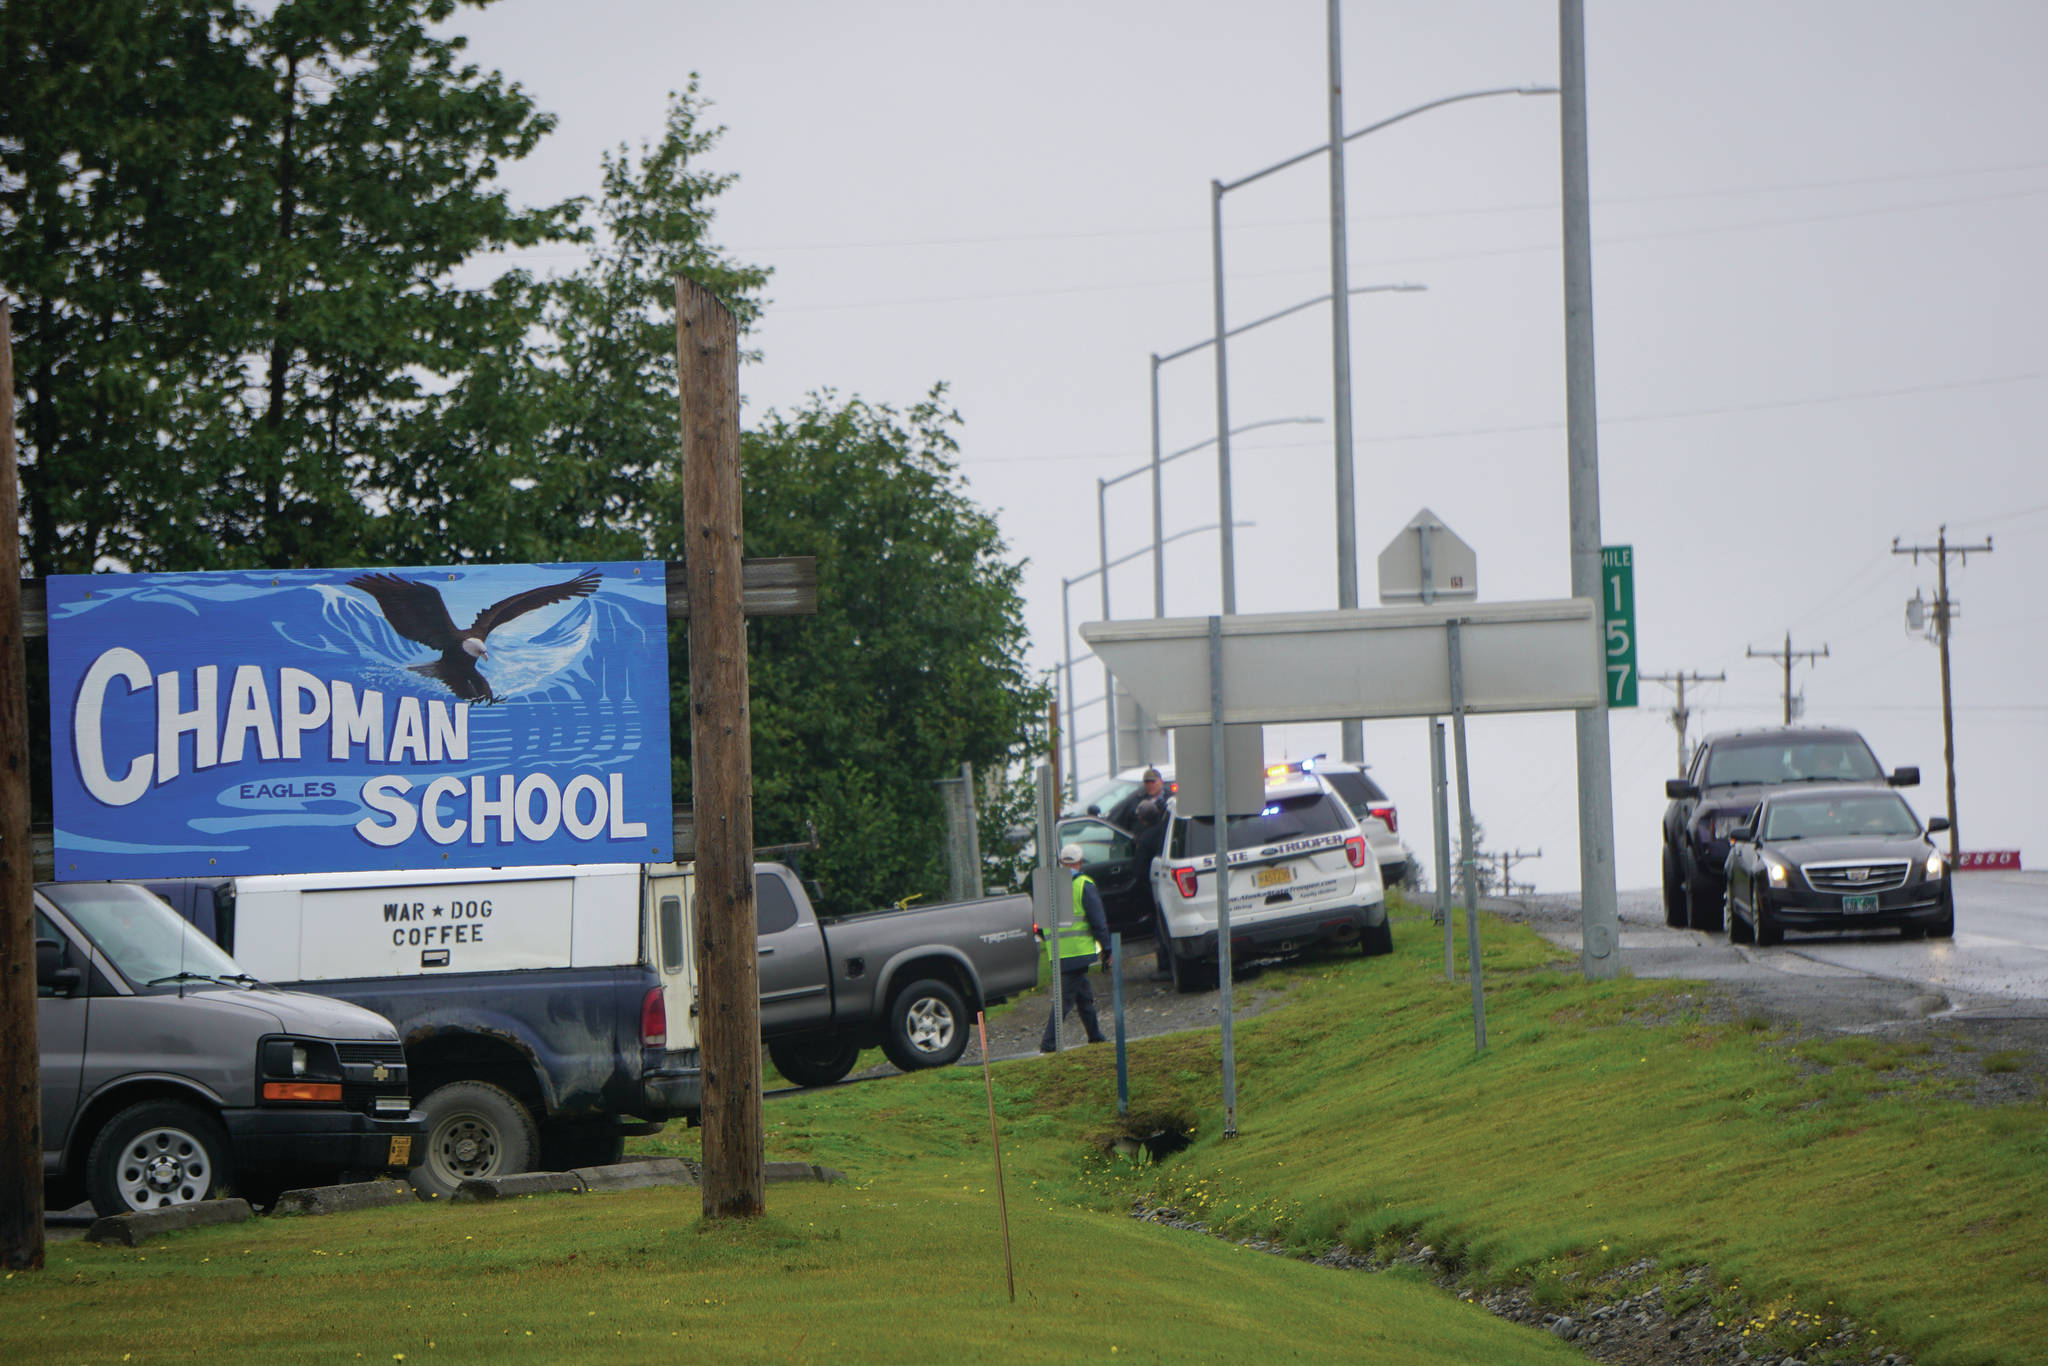 Photo by Michael Armstrong/Homer News 
Parents on Monday, Aug. 23, 2021, pick up students at Chapman School in Anchor Point, Alaska, after a shooting about a half mile north on the Sterling Highway in which an Alaska State Trooper was shot. The school was on lockdown while troopers searched for the alleged shooter, Bret Herrick, 60. An Alaska State Trooper stands by.